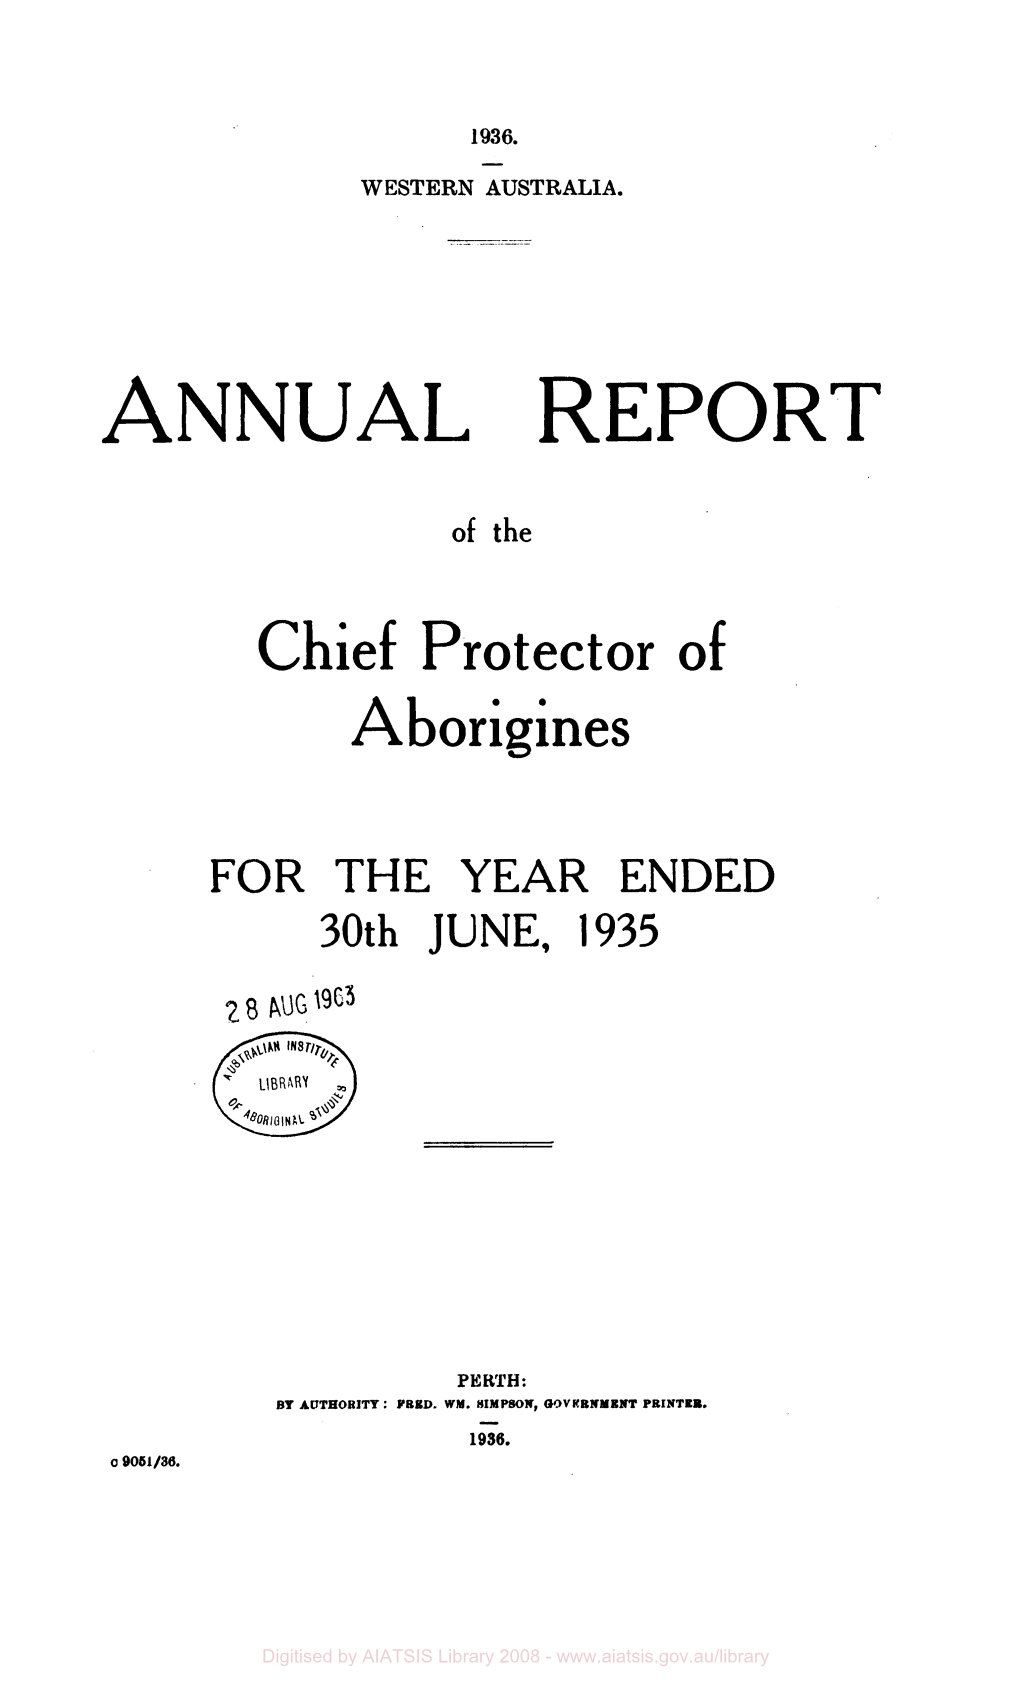 Annual Report of the Chief Protector of Aborigines for the Year Ended 30Th June 1935